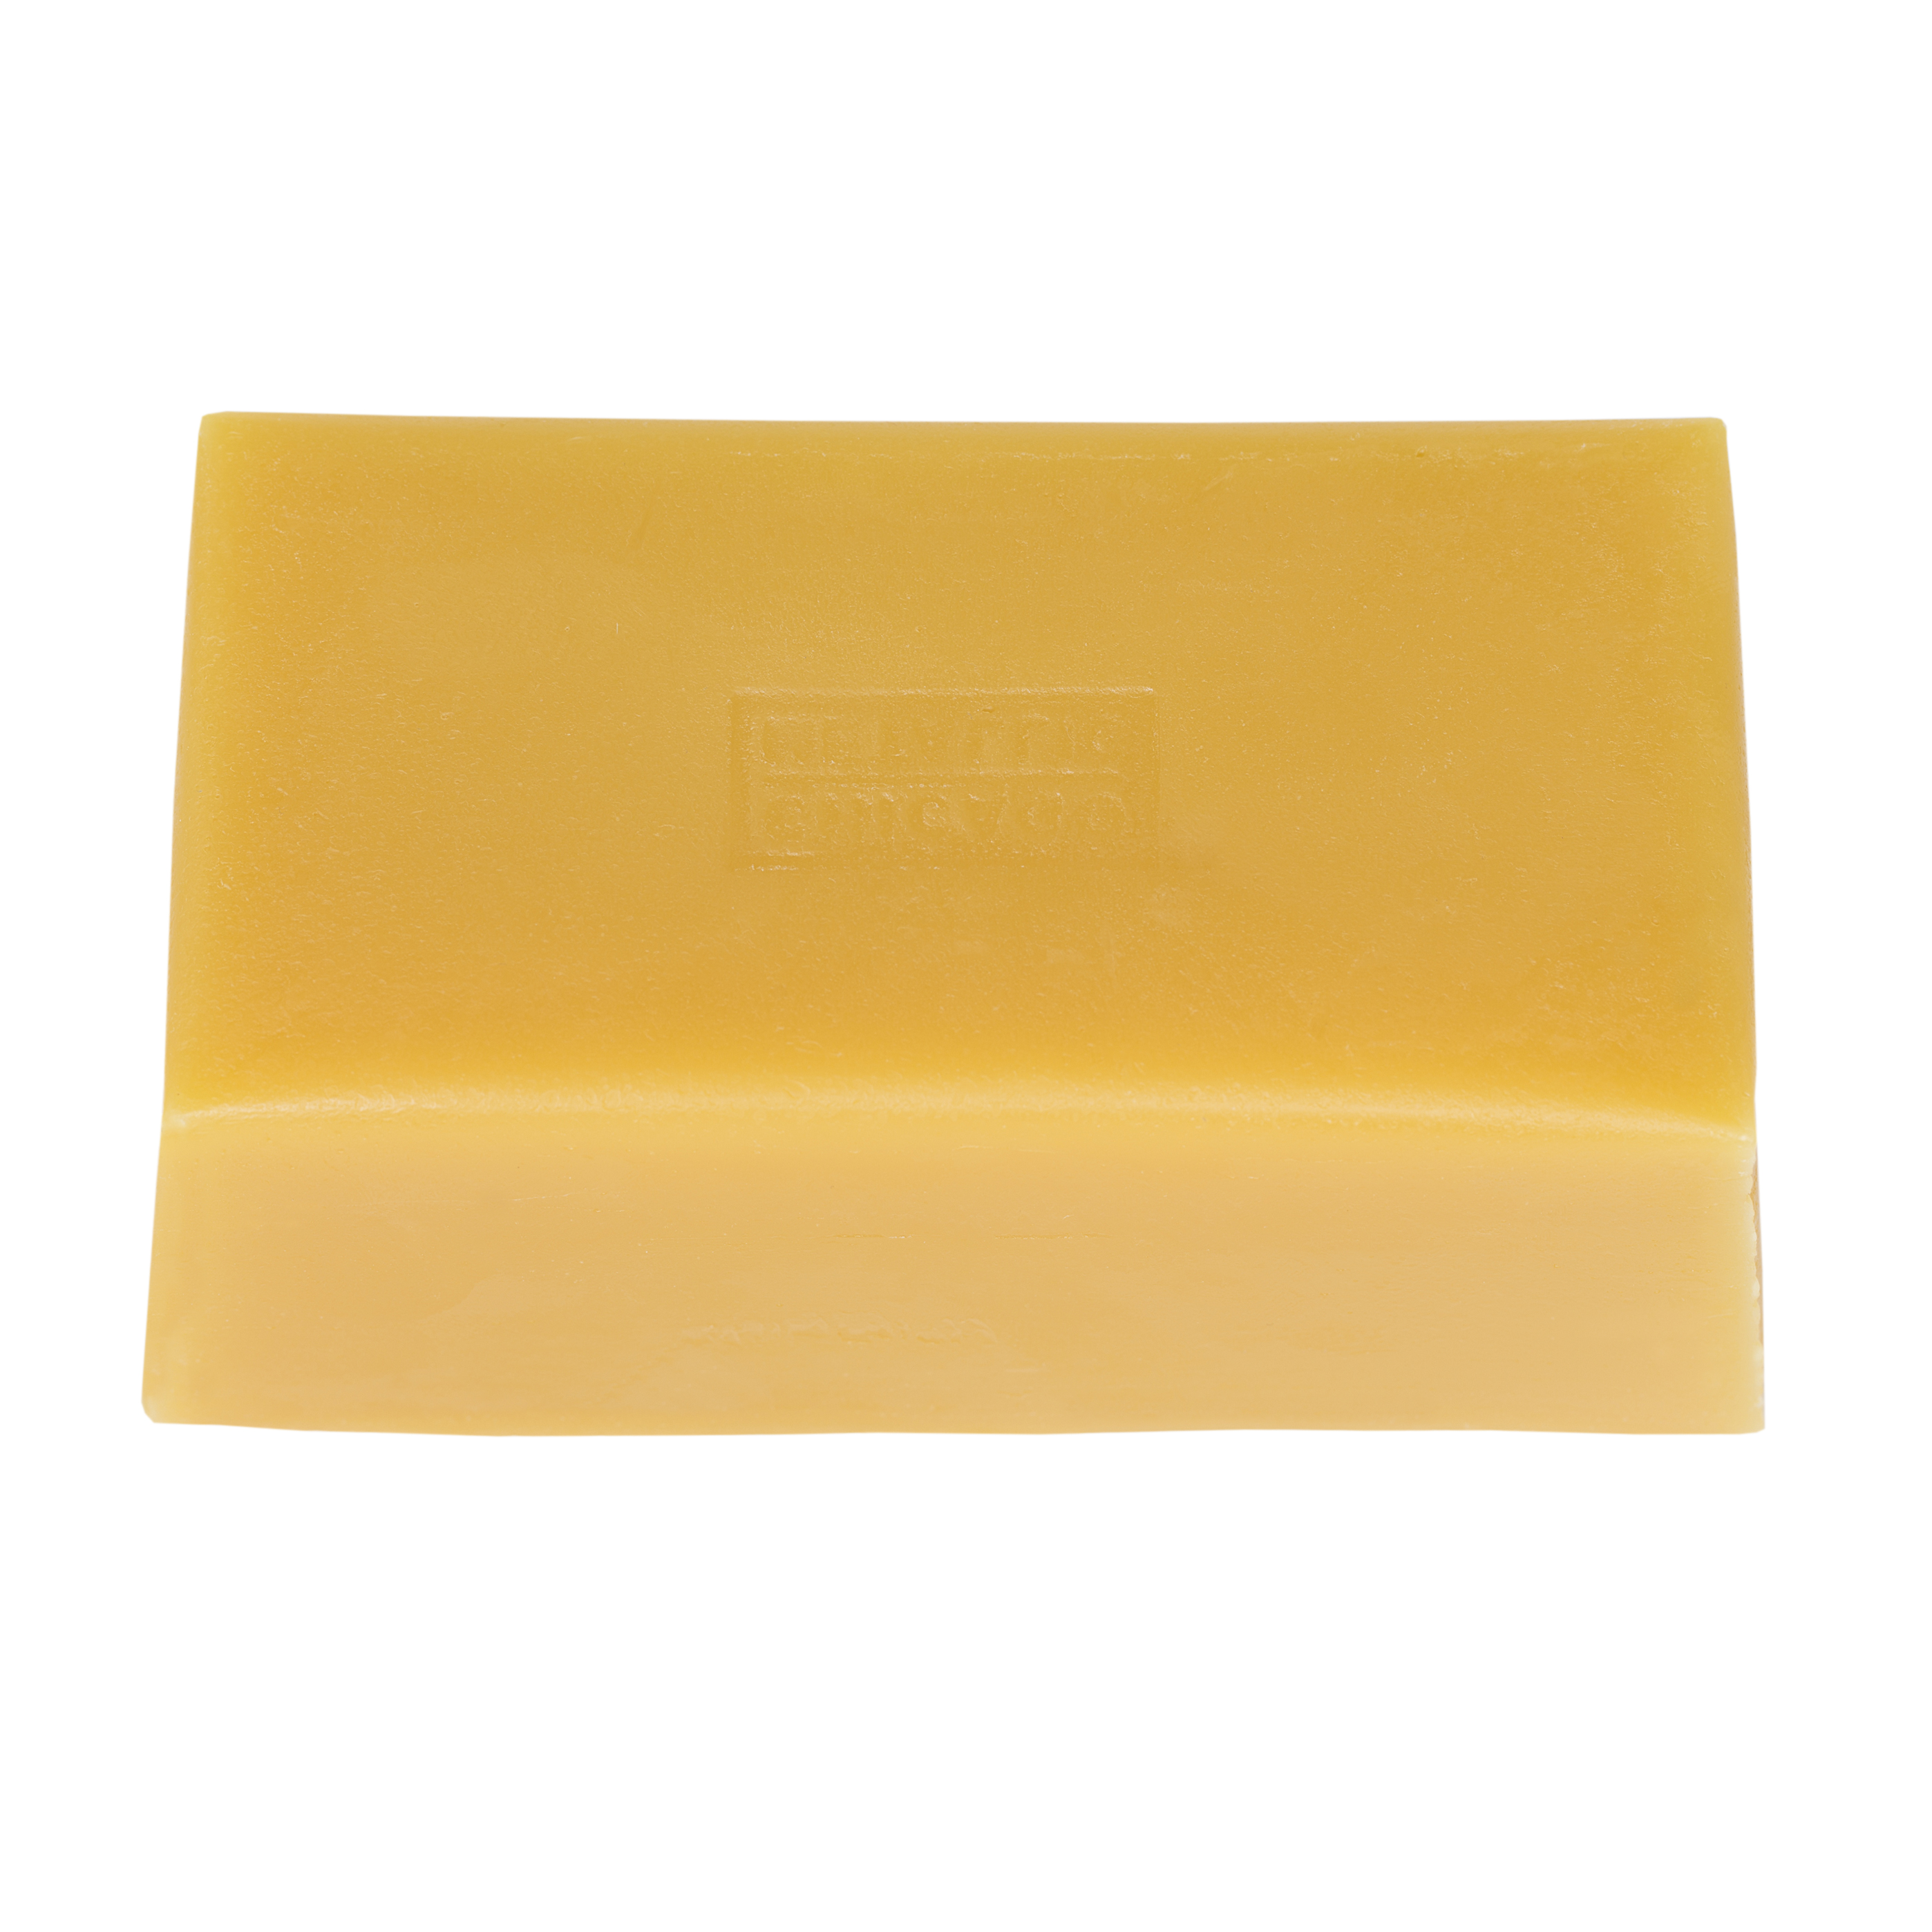 5 Pound Block Pure Beeswax 